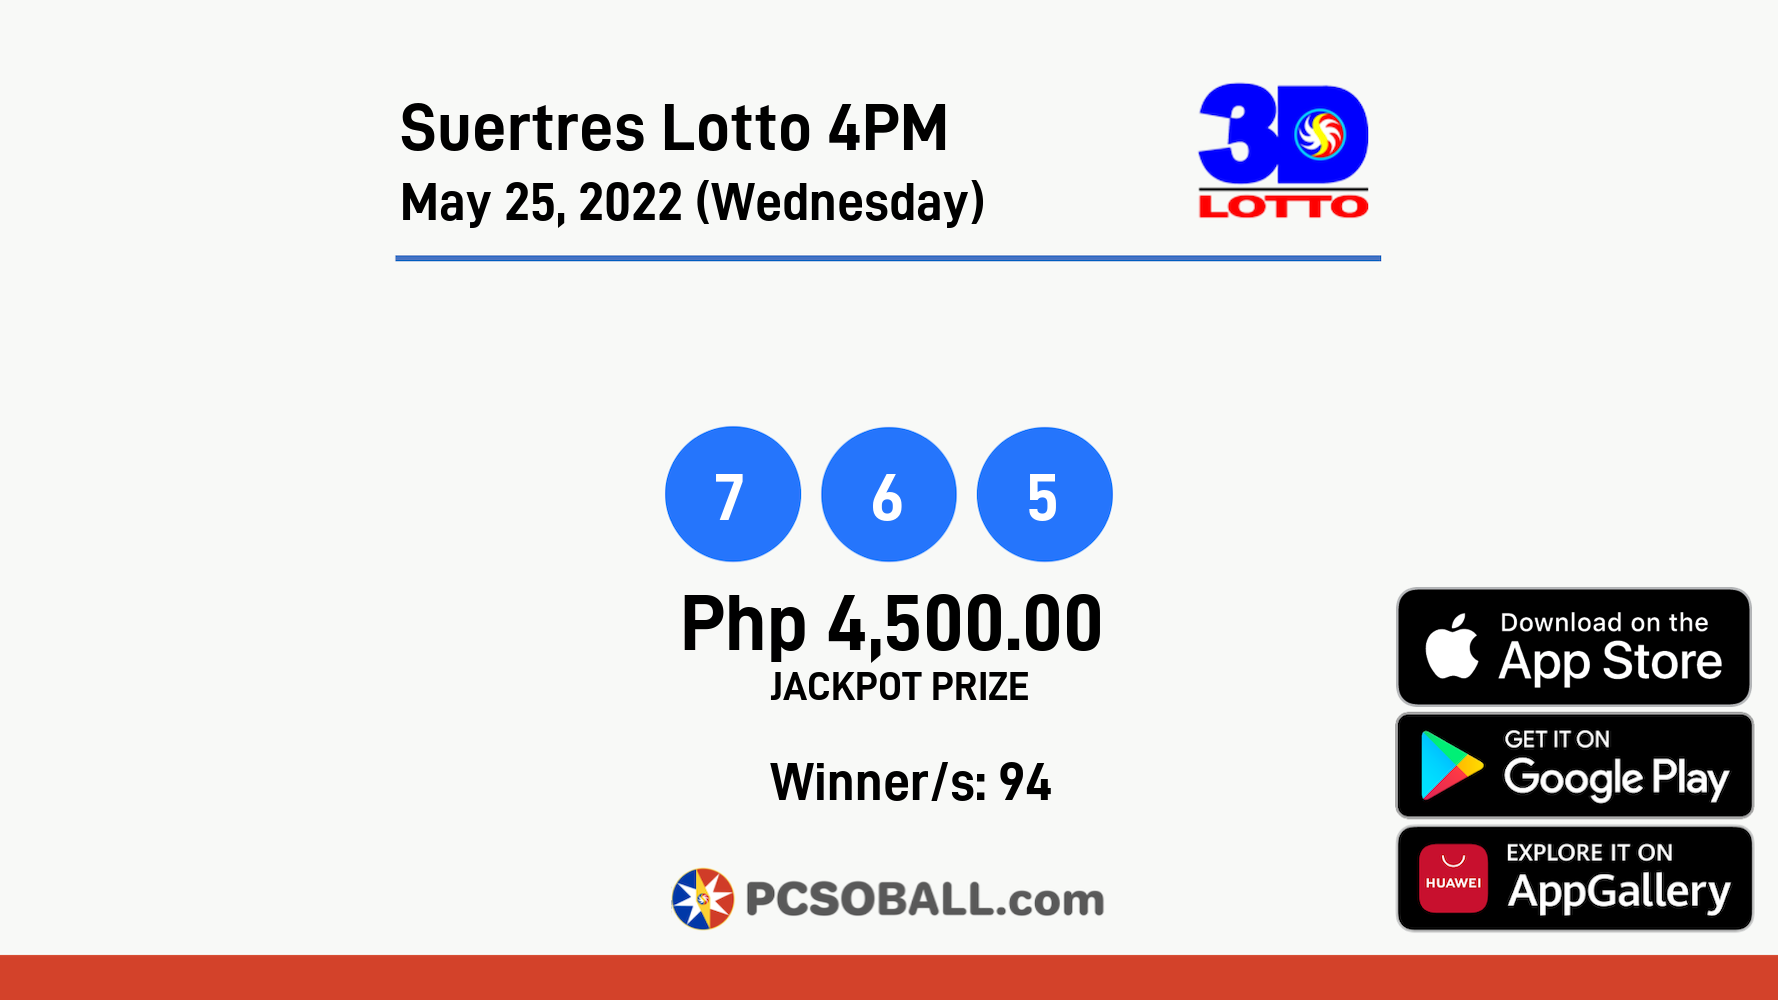 Suertres Lotto 4PM May 25, 2022 (Wednesday) Result